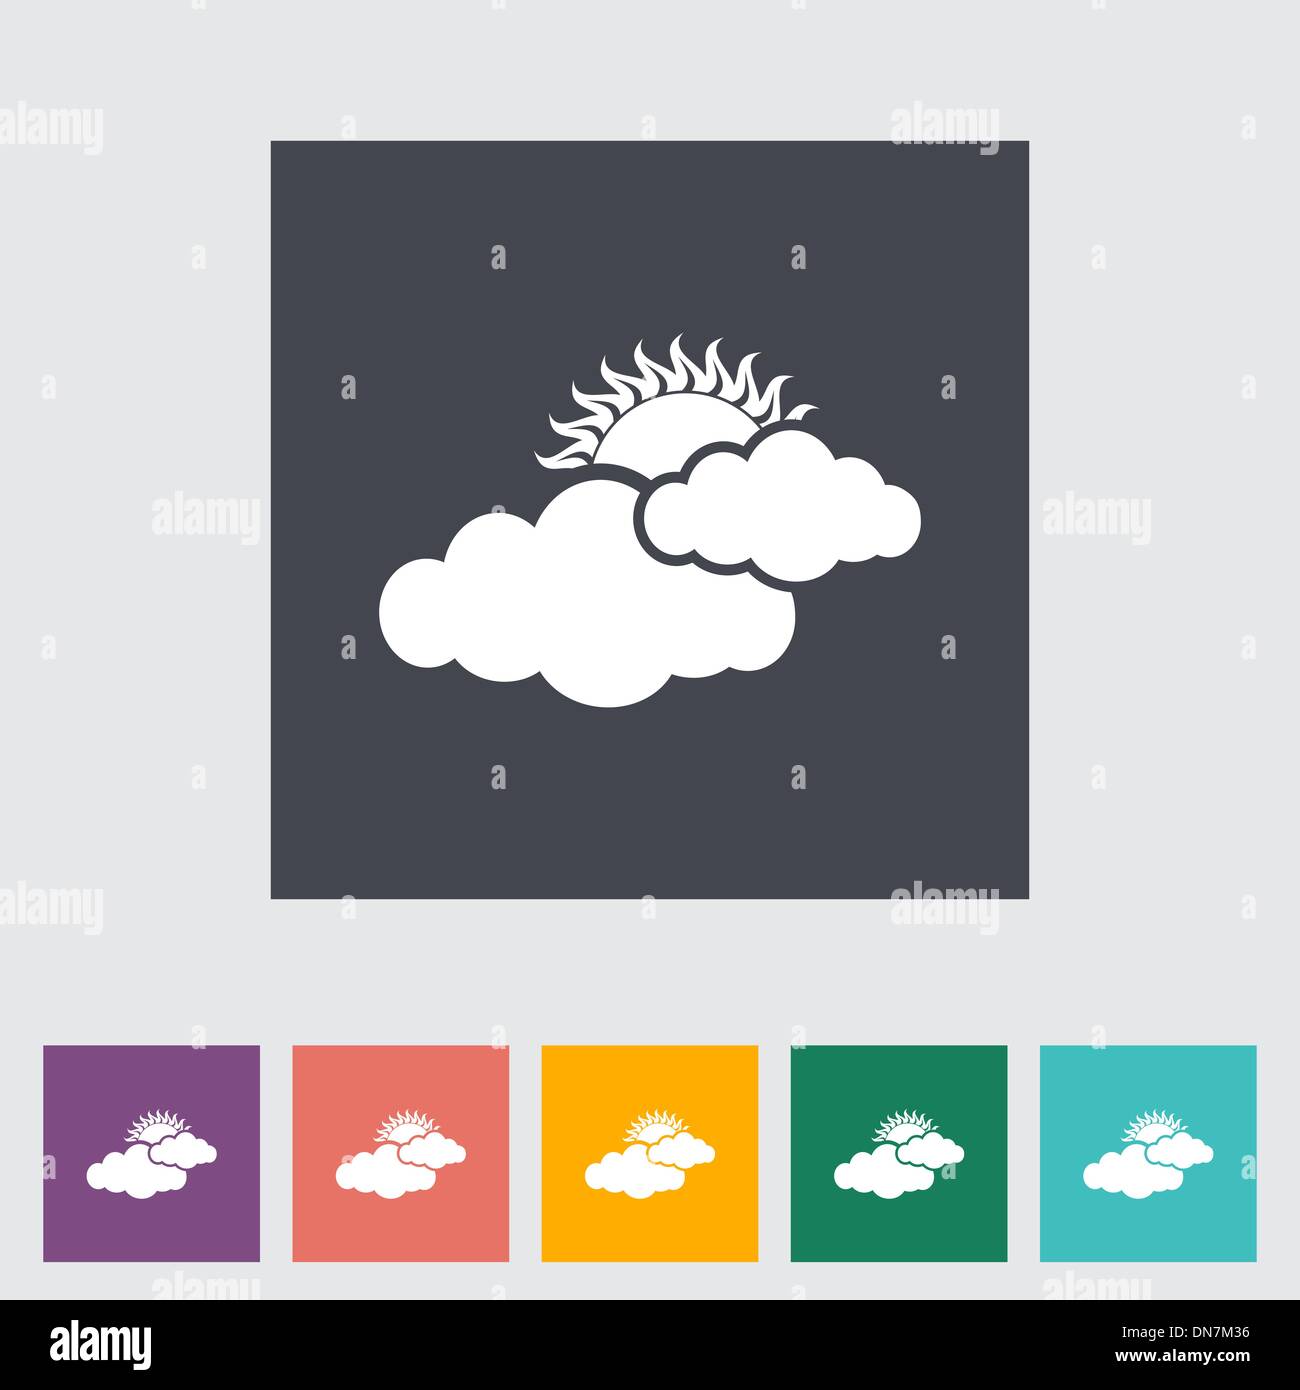 Cloudiness single flat icon. Stock Vector